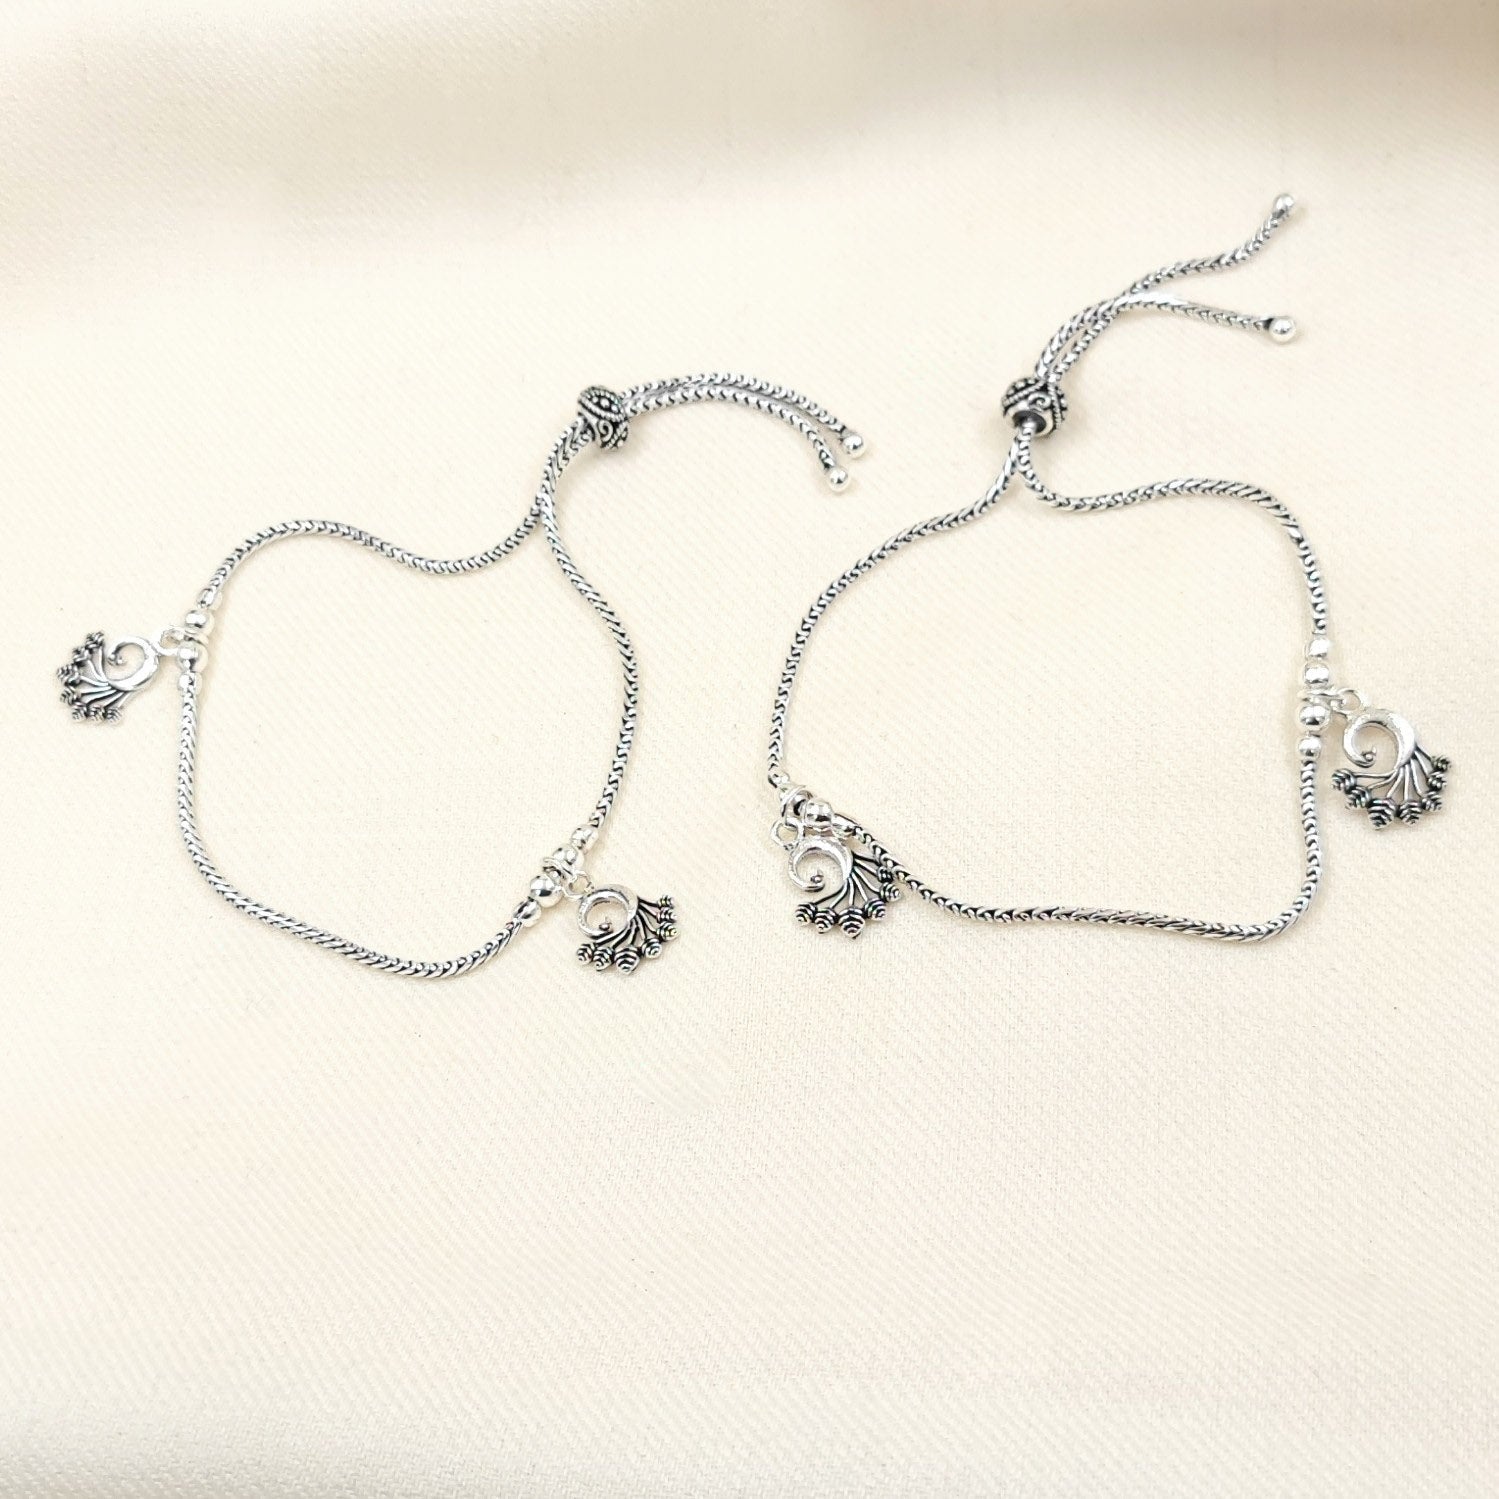 Silver Jewelry Anklets by Jauhri 92.5 Silver - Slider Peacock Anklets